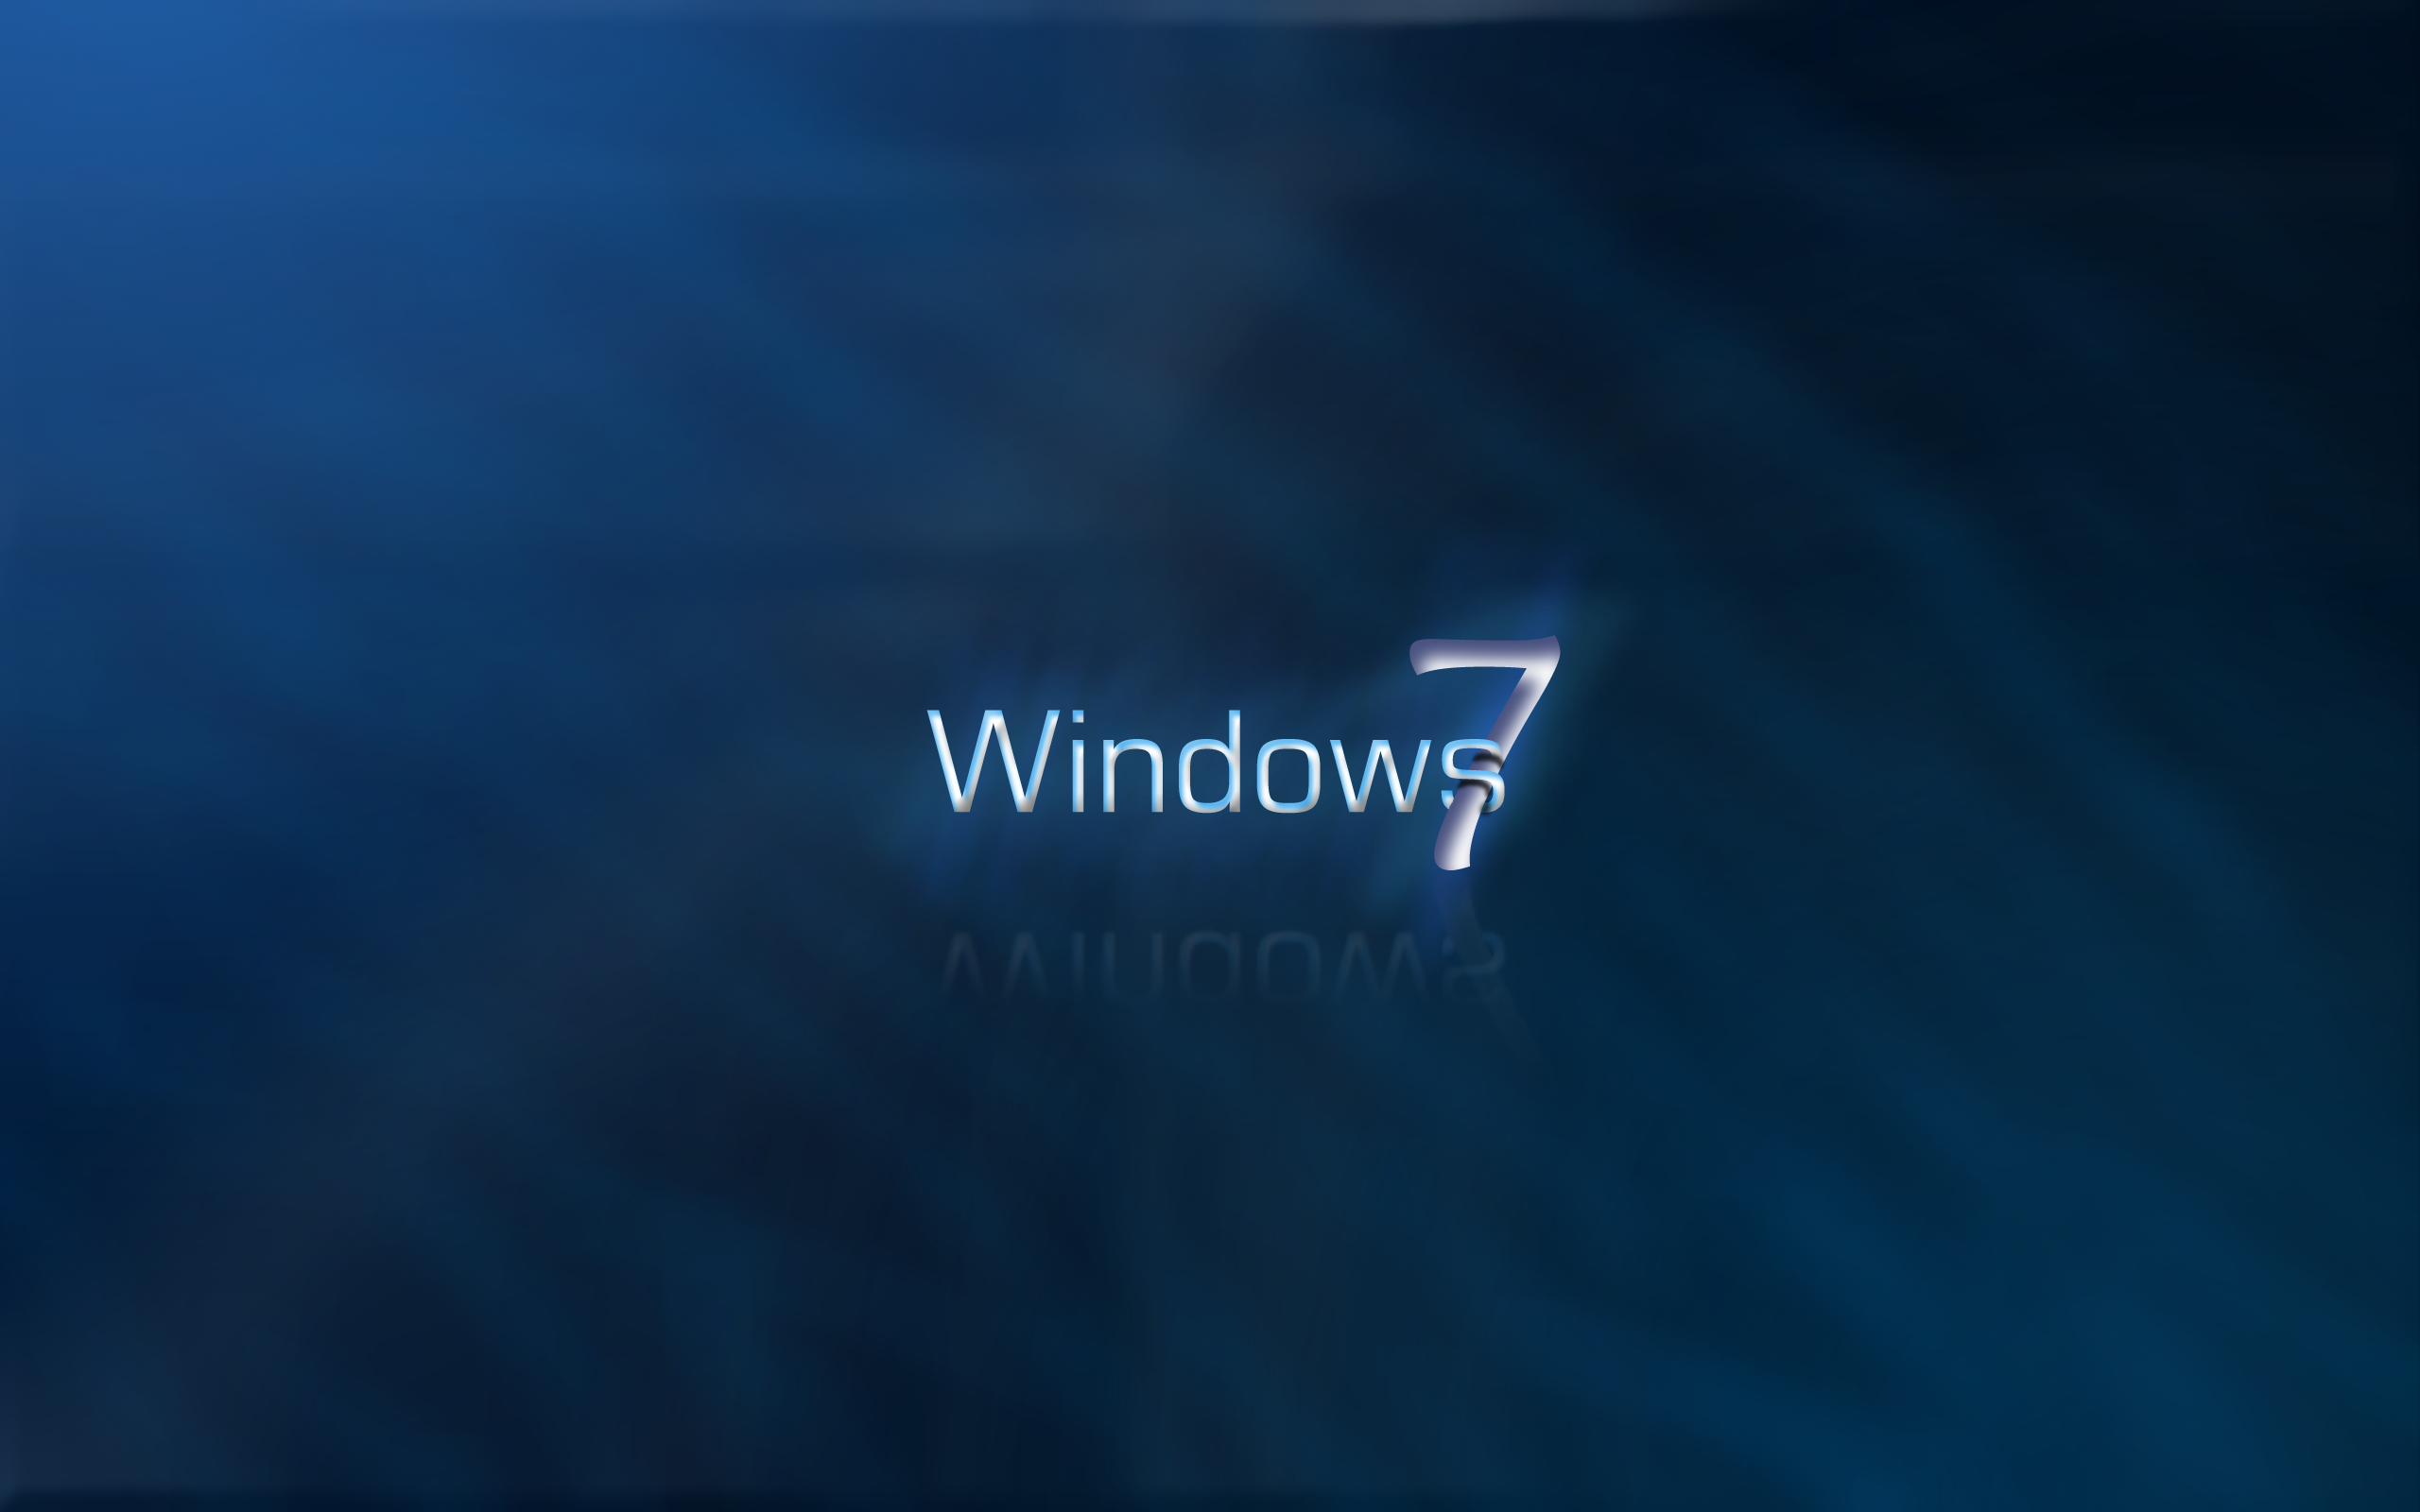  windows 7 wallpapers windows 7 wallpapers or you can say wallpapers